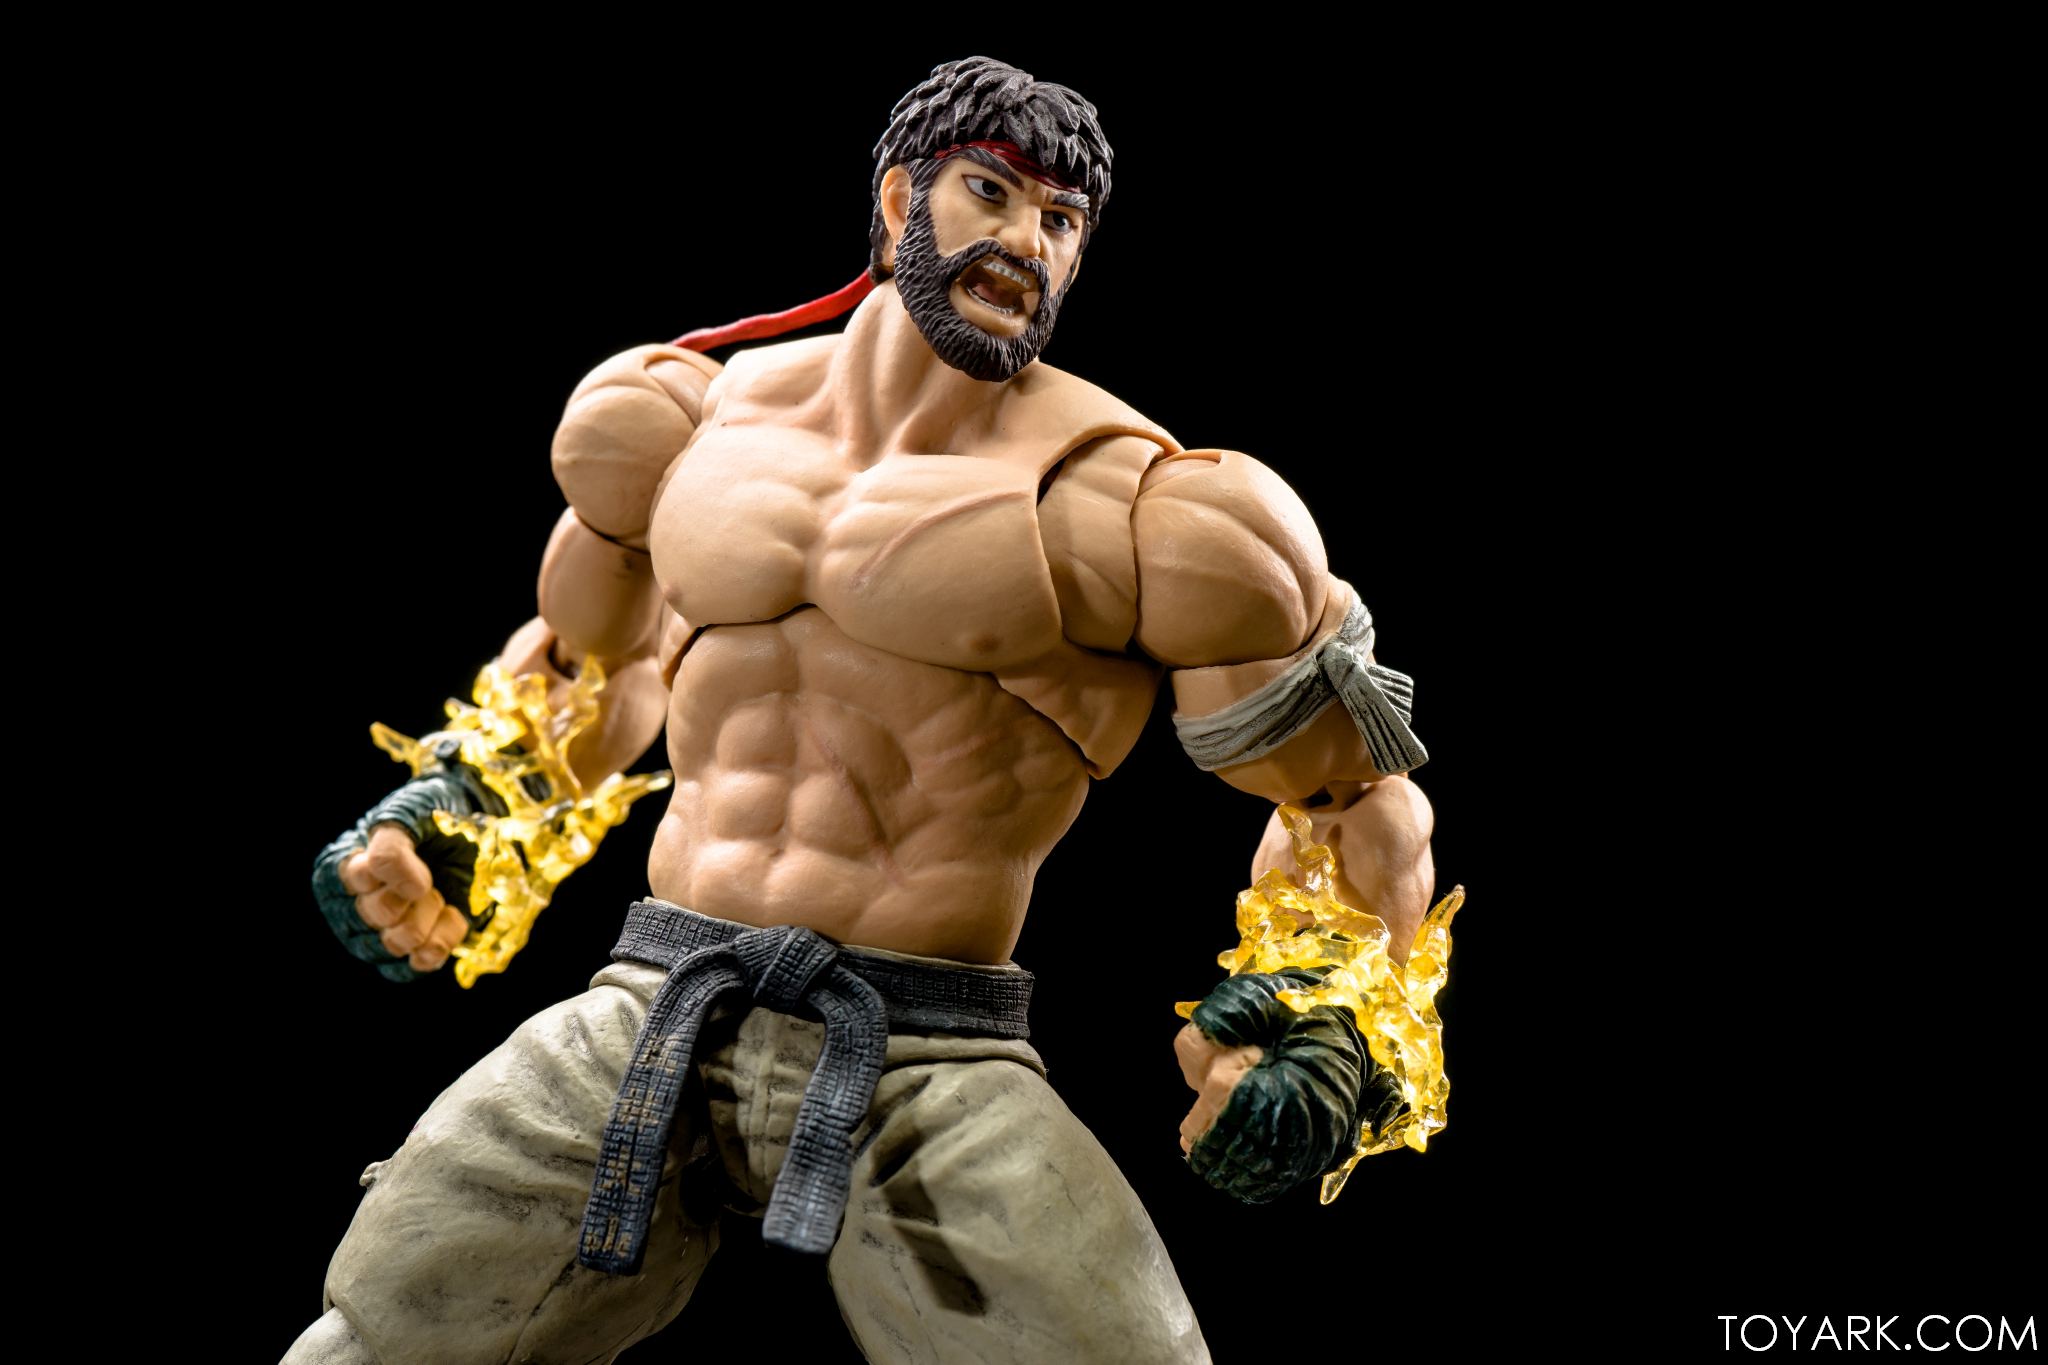 There’s A Hot Ryu Action Figure